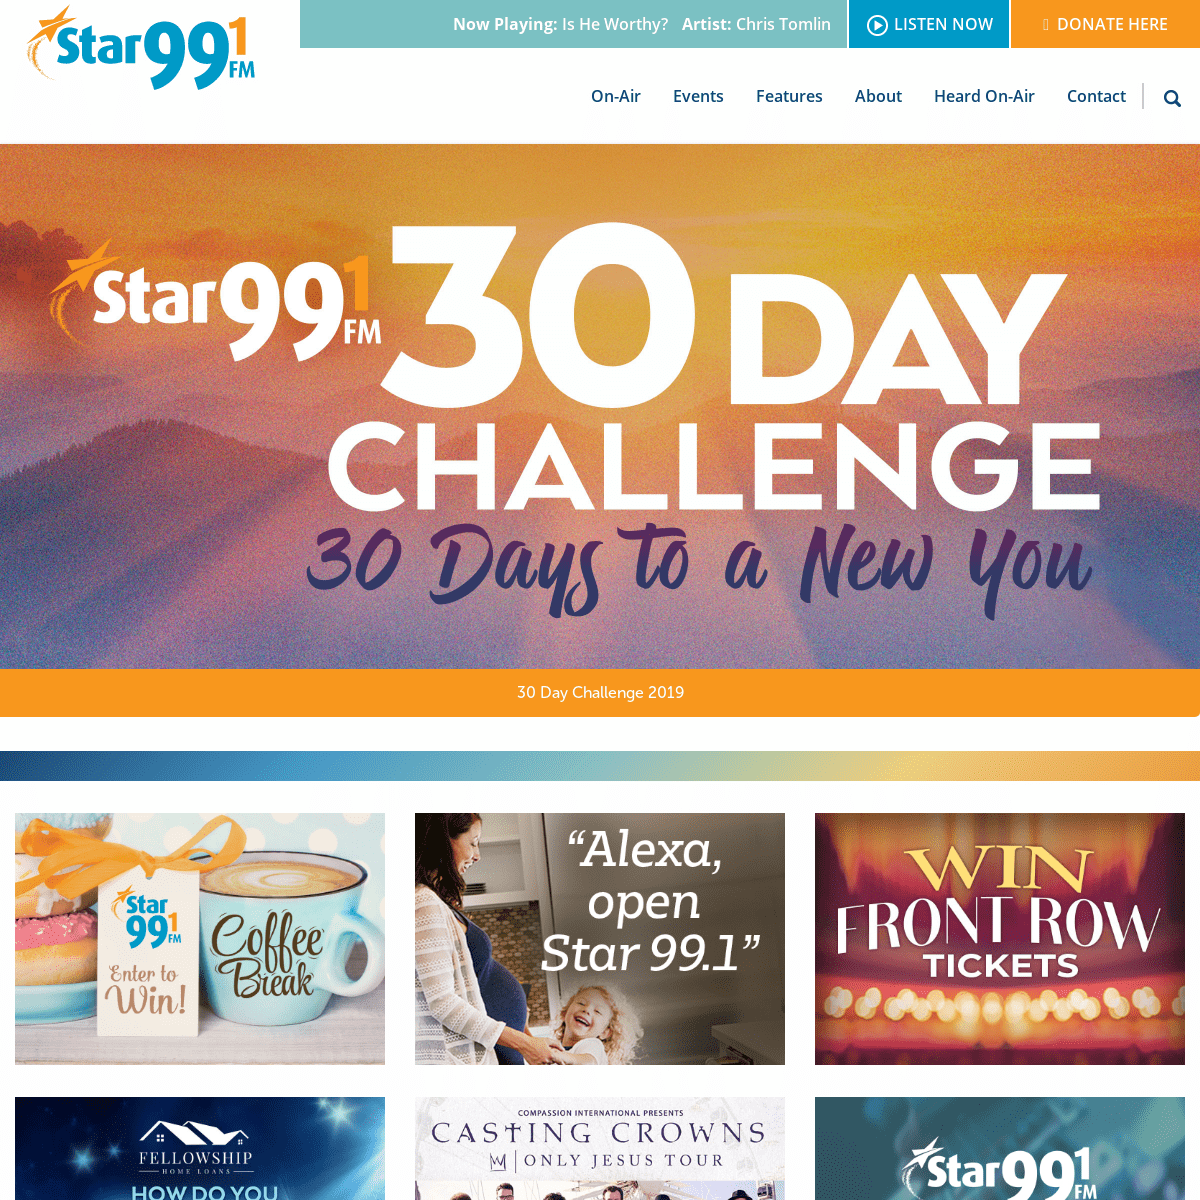 A complete backup of star991.com